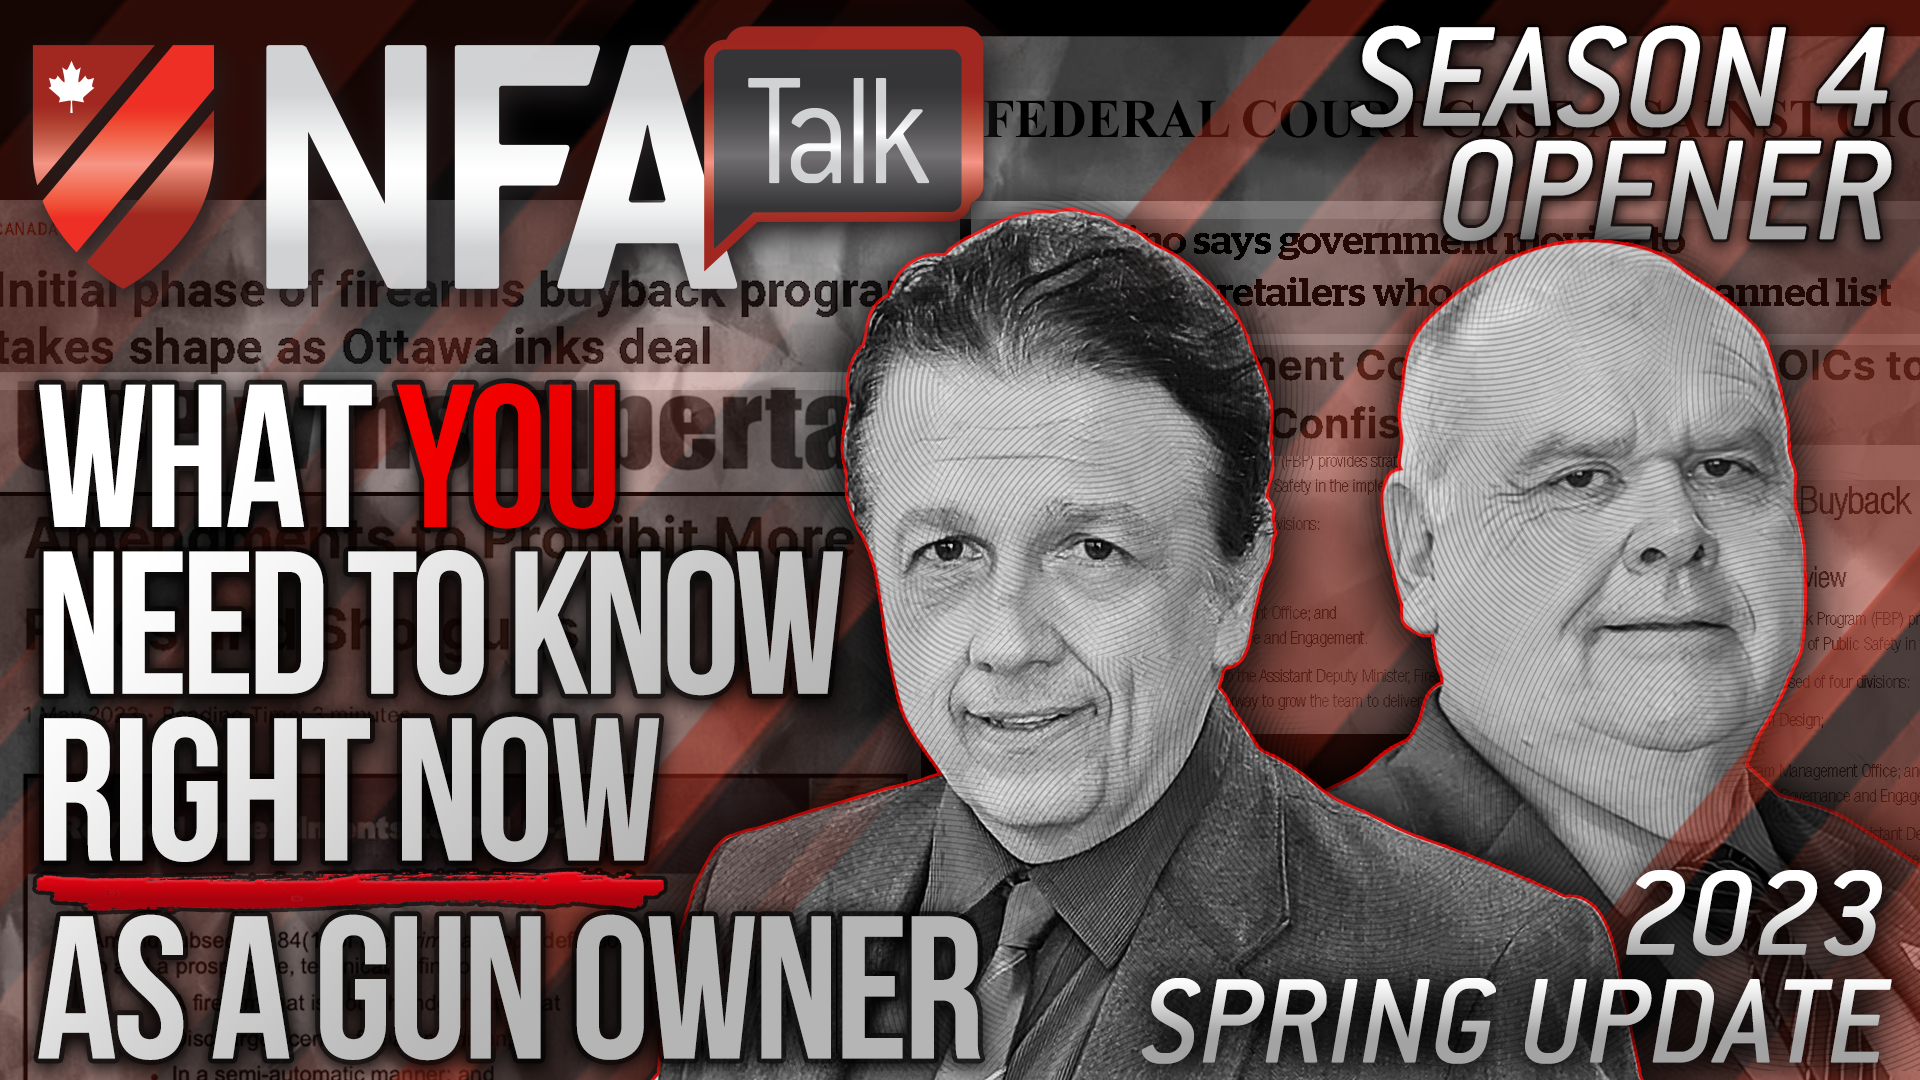 NFATALK S4E1 - What YOU Need To Know RIGHT NOW As A Gun Owner